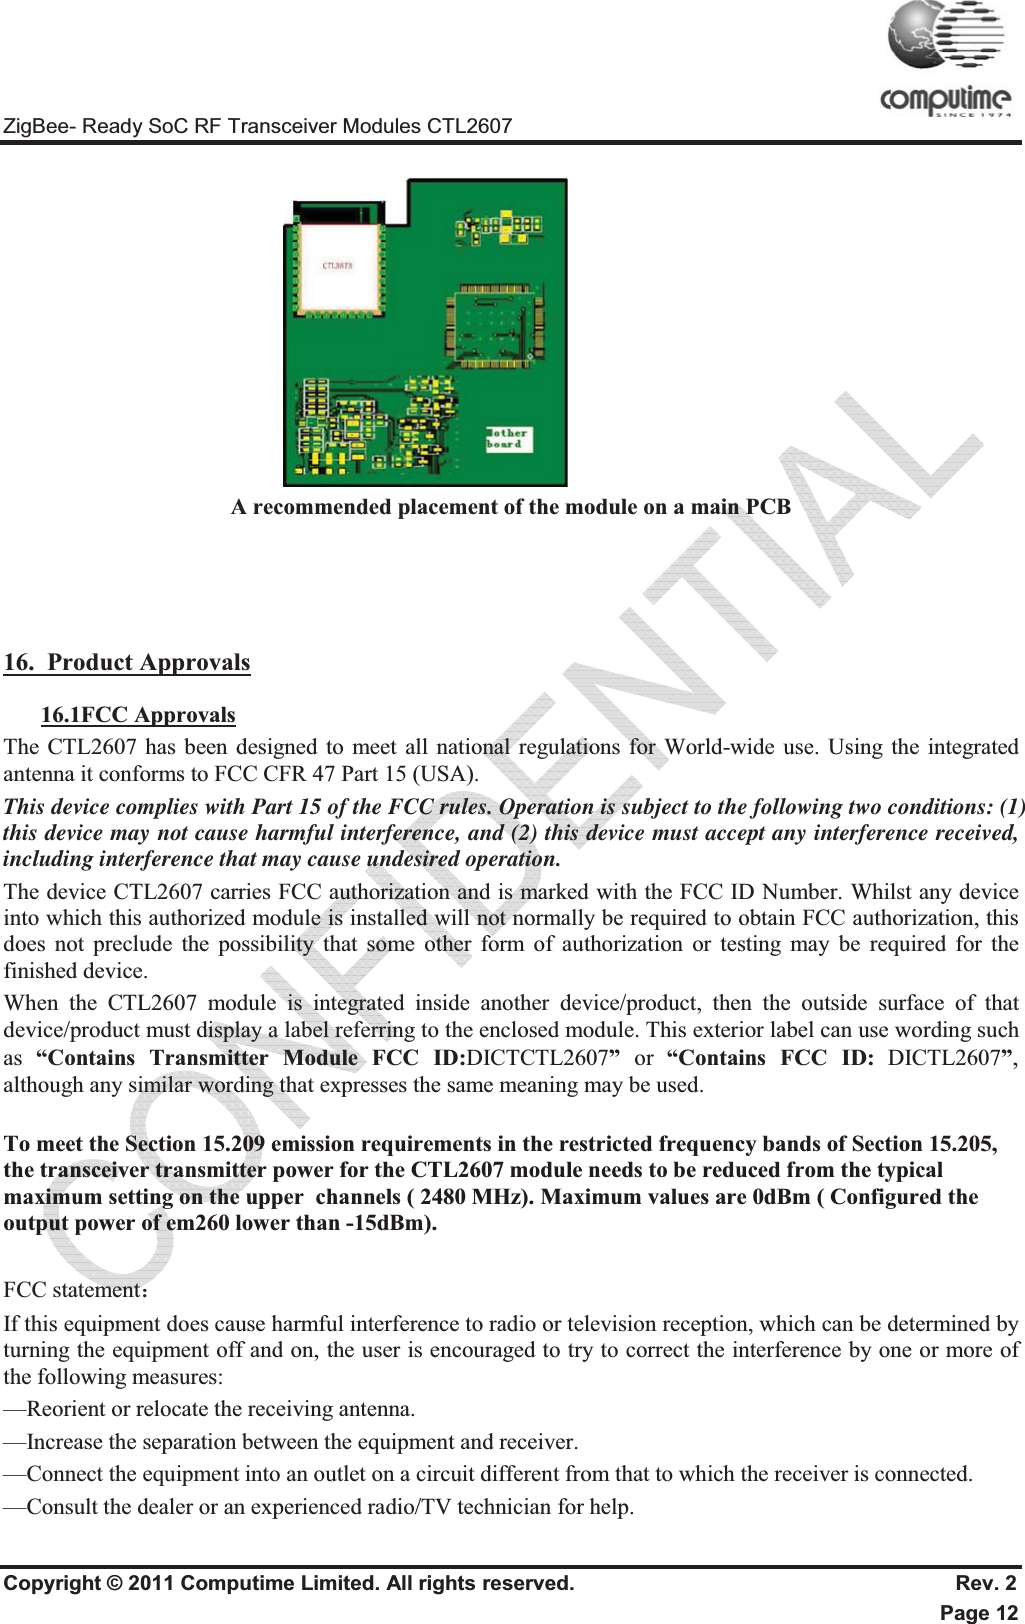 ZigBee- Ready SoC RF Transceiver Modules CTL2607 Copyright © 2011 Computime Limited. All rights reserved.                                                       Rev. 2 Page 12                             A recommended placement of the module on a main PCB  16.  Product Approvals16.1FCC ApprovalsThe CTL2607 has been designed to meet all national regulations for World-wide use. Using the integrated antenna it conforms to FCC CFR 47 Part 15 (USA).  This device complies with Part 15 of the FCC rules. Operation is subject to the following two conditions: (1) this device may not cause harmful interference, and (2) this device must accept any interference received, including interference that may cause undesired operation.  The device CTL2607 carries FCC authorization and is marked with the FCC ID Number. Whilst any device into which this authorized module is installed will not normally be required to obtain FCC authorization, this does not preclude the possibility that some other form of authorization or testing may be required for the finished device.  When the CTL2607 module is integrated inside another device/product, then the outside surface of that device/product must display a label referring to the enclosed module. This exterior label can use wording such as  “Contains Transmitter Module FCC ID:DICTCTL2607”  or  “Contains FCC ID: DICTL2607”,although any similar wording that expresses the same meaning may be used. To meet the Section 15.209 emission requirements in the restricted frequency bands of Section 15.205, the transceiver transmitter power for the CTL2607 module needs to be reduced from the typical maximum setting on the upper  channels ( 2480 MHz). Maximum values are 0dBm ( Configured the output power of em260 lower than -15dBm). FCC statement˖If this equipment does cause harmful interference to radio or television reception, which can be determined by turning the equipment off and on, the user is encouraged to try to correct the interference by one or more of the following measures: —Reorient or relocate the receiving antenna. —Increase the separation between the equipment and receiver. —Connect the equipment into an outlet on a circuit different from that to which the receiver is connected. —Consult the dealer or an experienced radio/TV technician for help. 